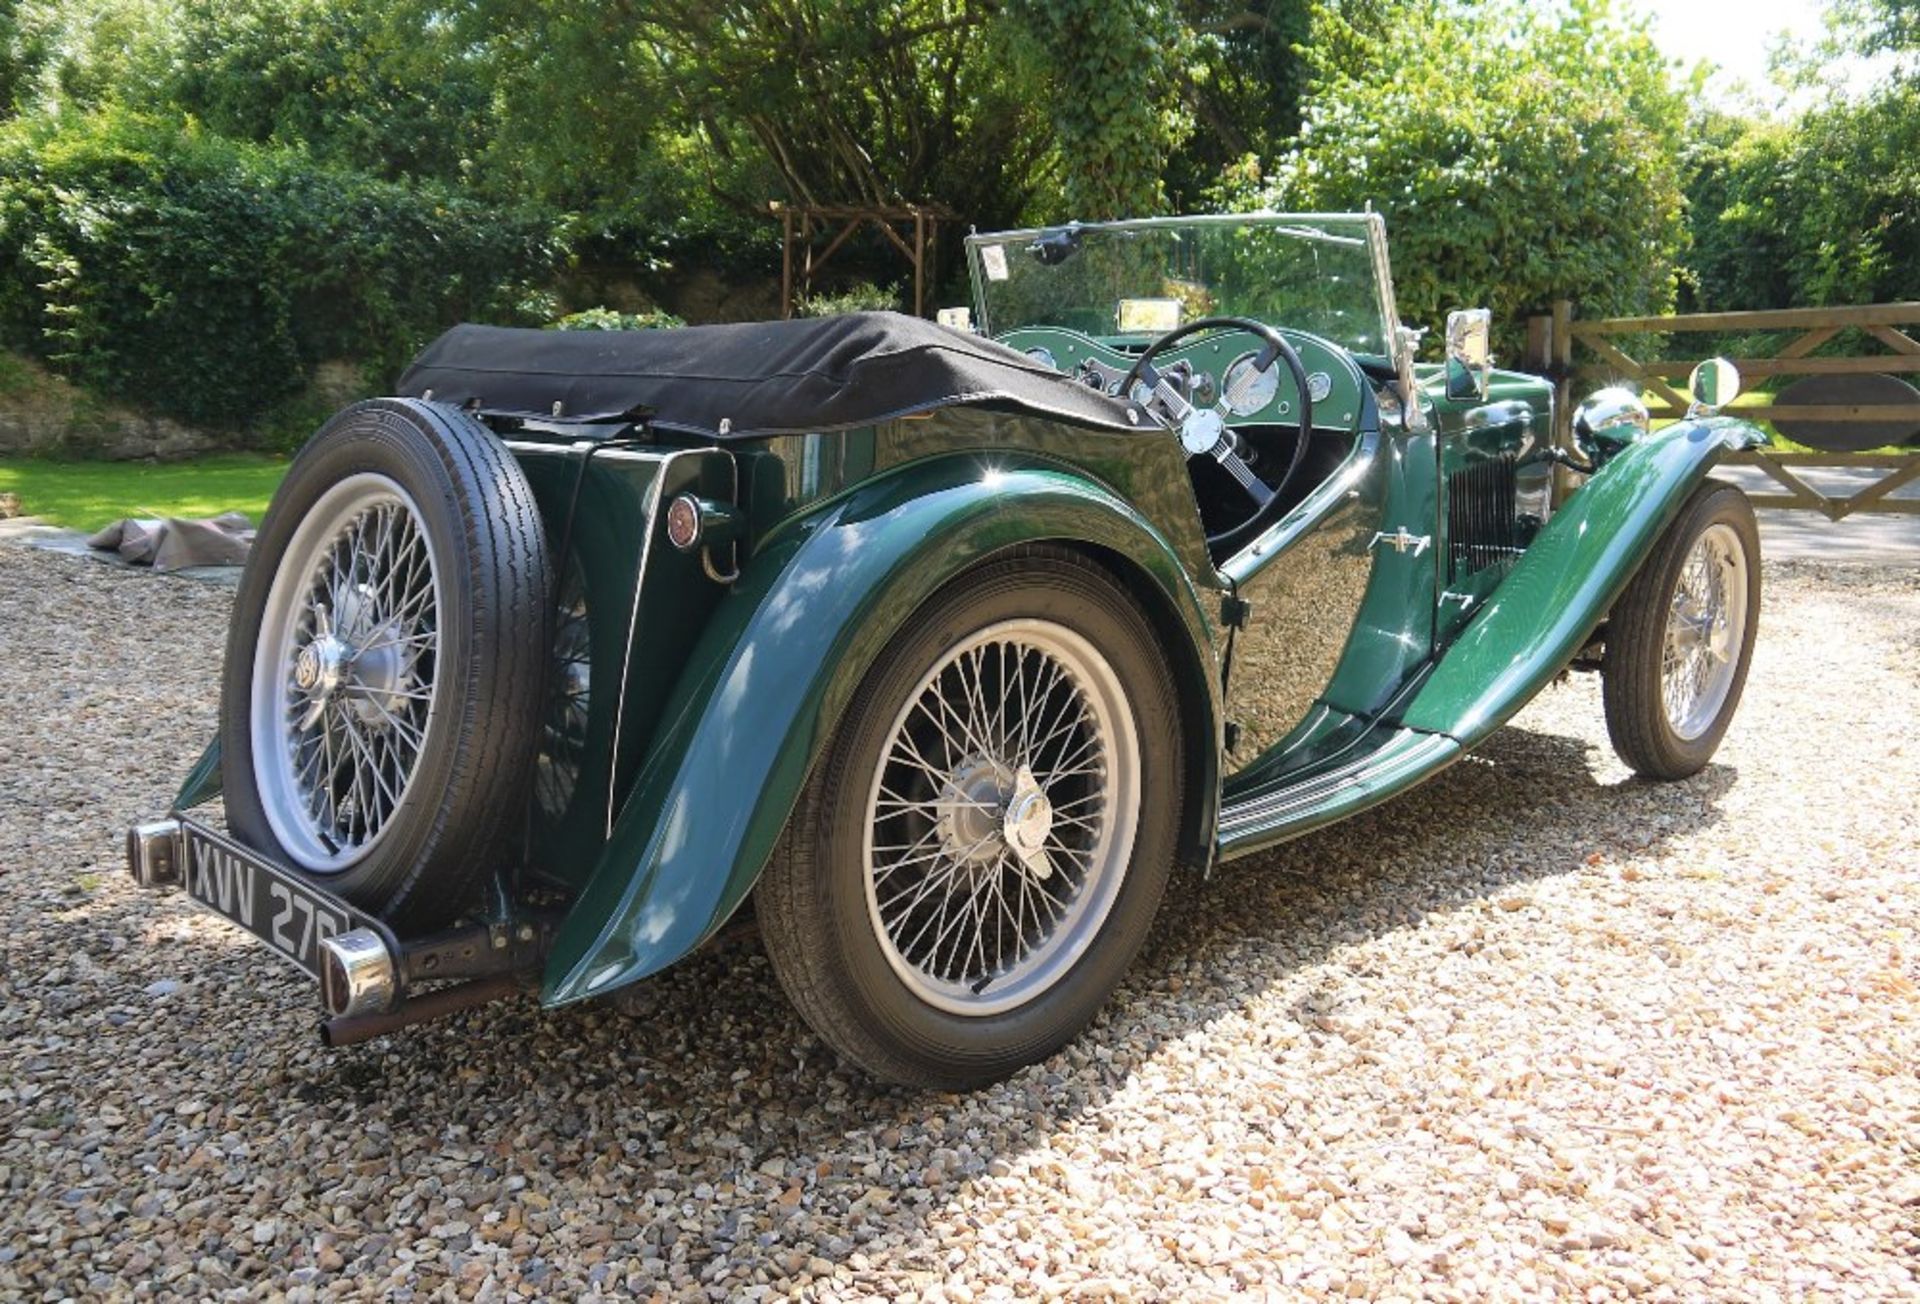 1949 MG TC 'MIDGET' Registration Number: XVV 276 Chassis number: TC 7712 Recorded Mileage: 40,700 - Image 5 of 21